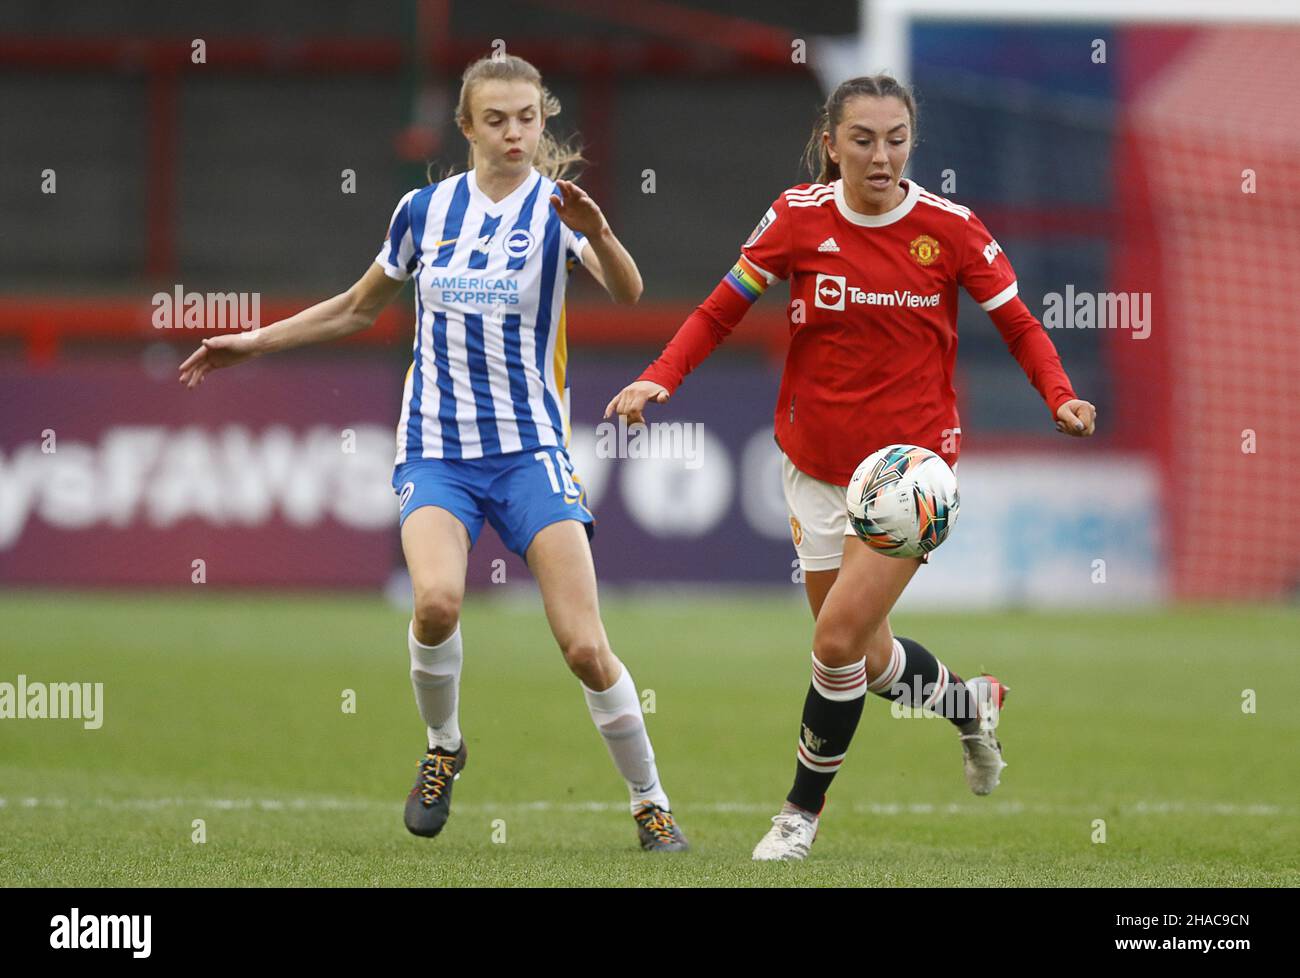 Crawley, UK. 12th Dec, 2021. Ellie Brazil of Brighton and Hove Albion and Katie Zelem of Manchester United challenge for the ball during the The FA Women's Super League match at The People's Pension Stadium, Crawley. Picture credit should read: Paul Terry/Sportimage Credit: Sportimage/Alamy Live News Credit: Sportimage/Alamy Live News Stock Photo